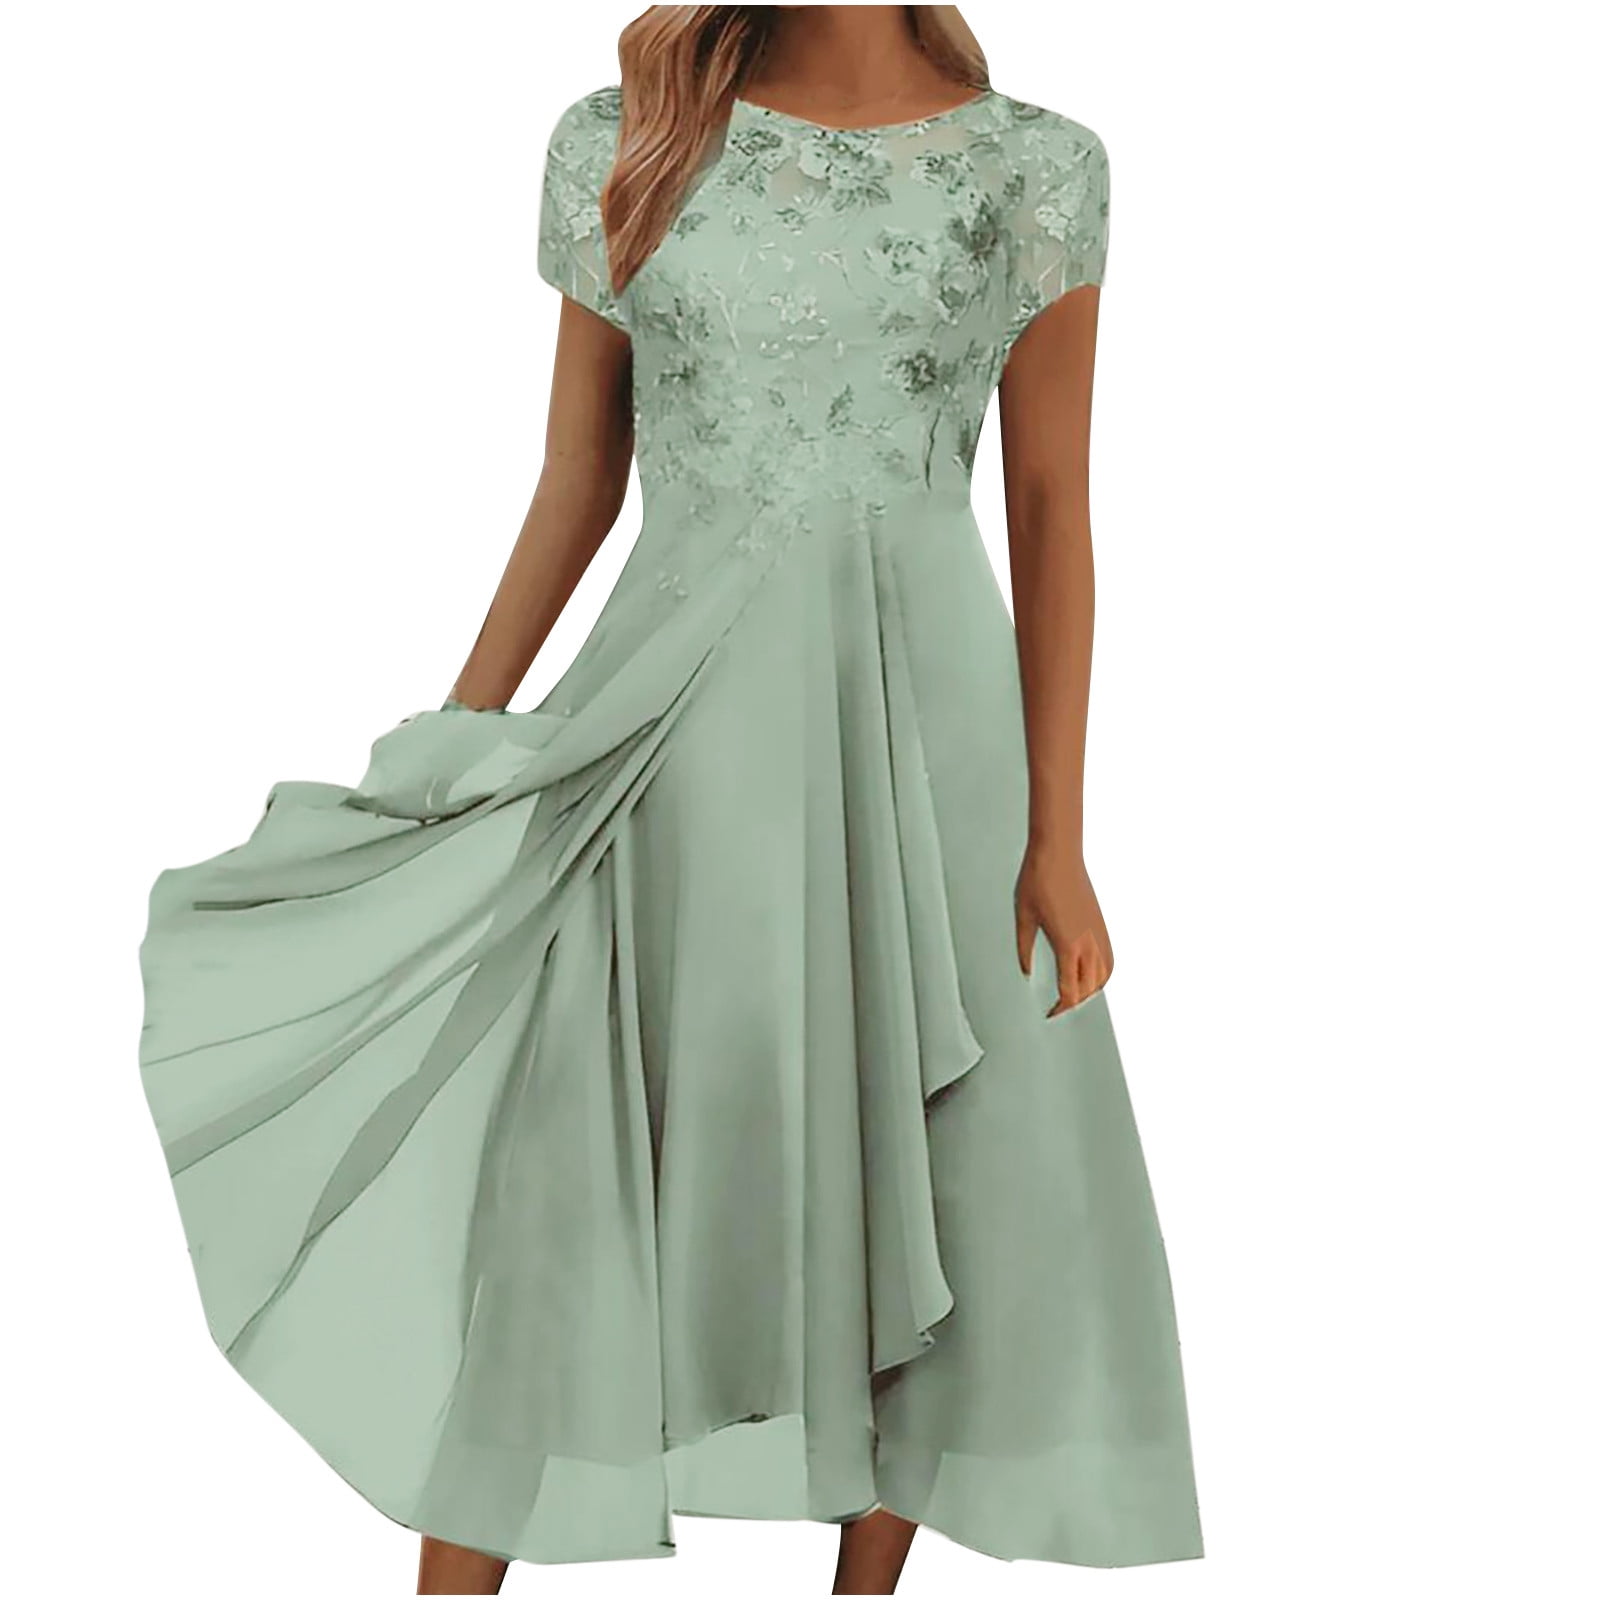 sage green mother of the bride dress